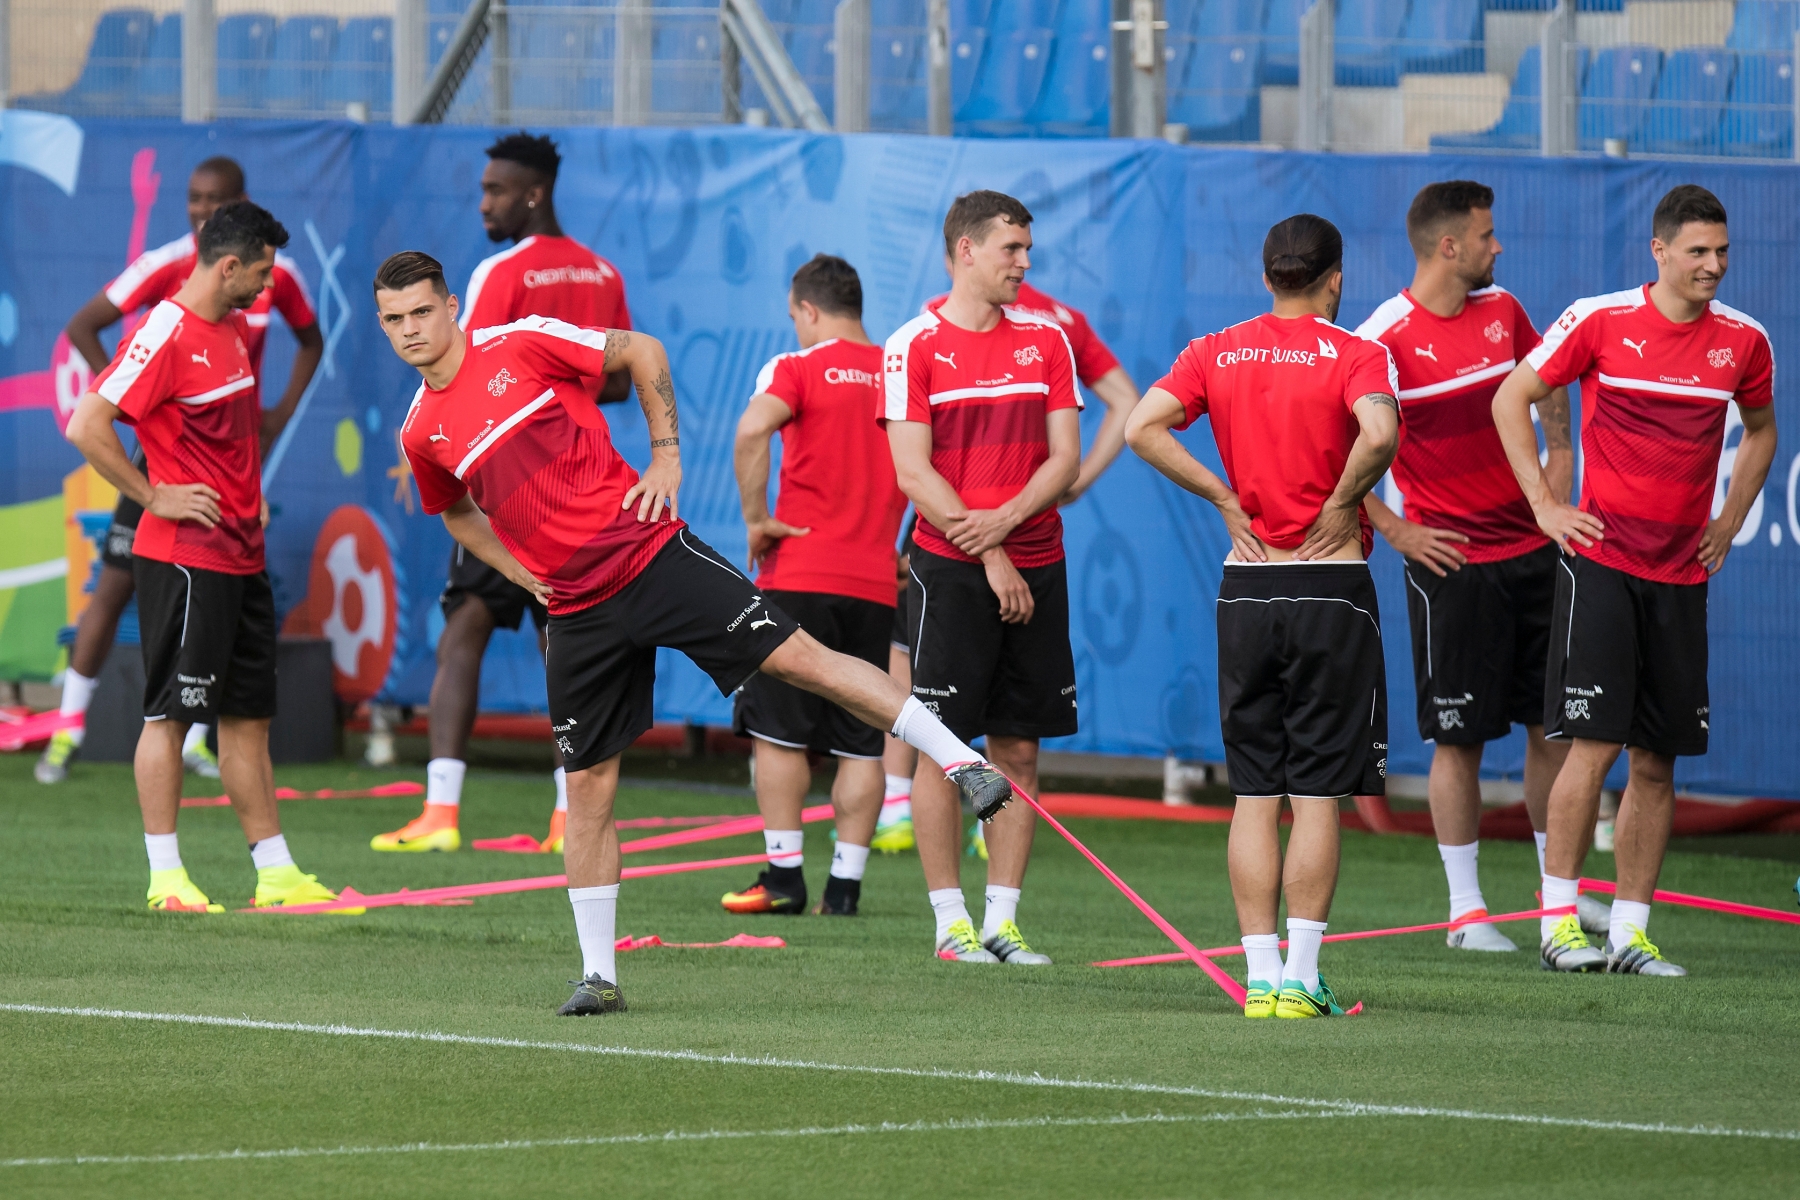 Swiss soccer players with Granit Xhaka, center left, streche during a training session, at the Stade de la Mosson stadium, in Montpellier, France, Tuesday, June 21, 2016. The Swiss national soccer team will play a round of 16 match during the UEFA EURO 2016 soccer championship in France. (KEYSTONE/Jean-Christophe Bott) FRANCE SWITZERLAND SOCCER EURO 2016